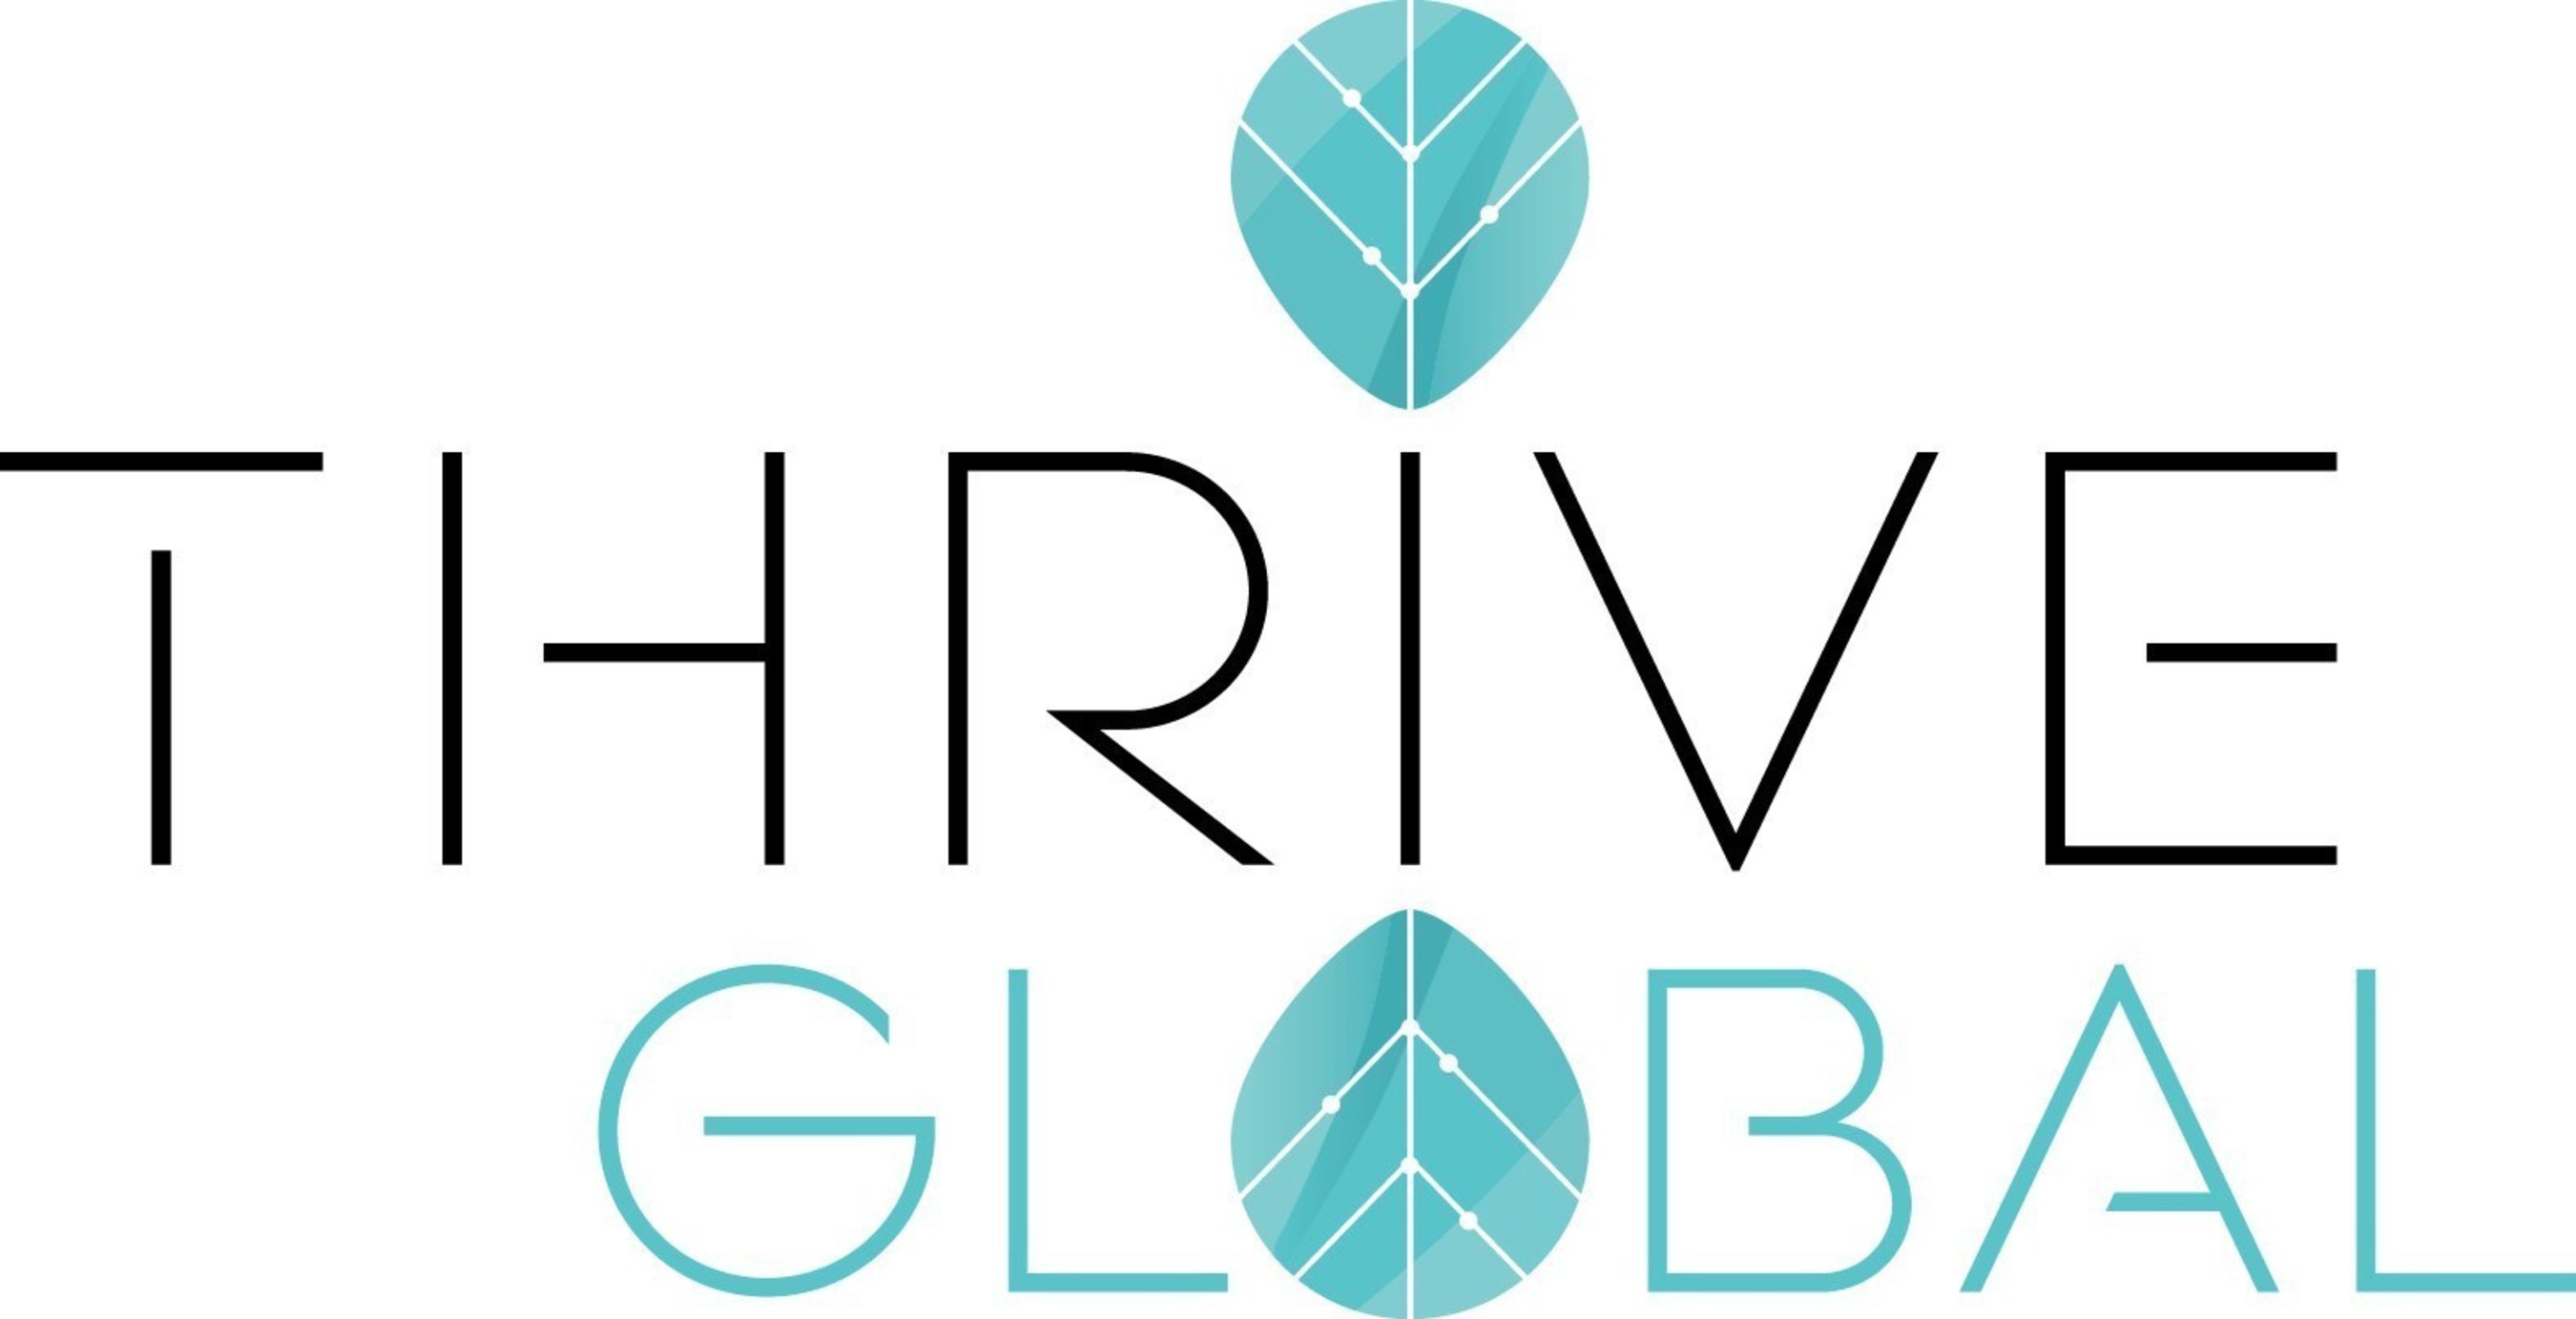 The logo for Thrive Global, who wrote this article.